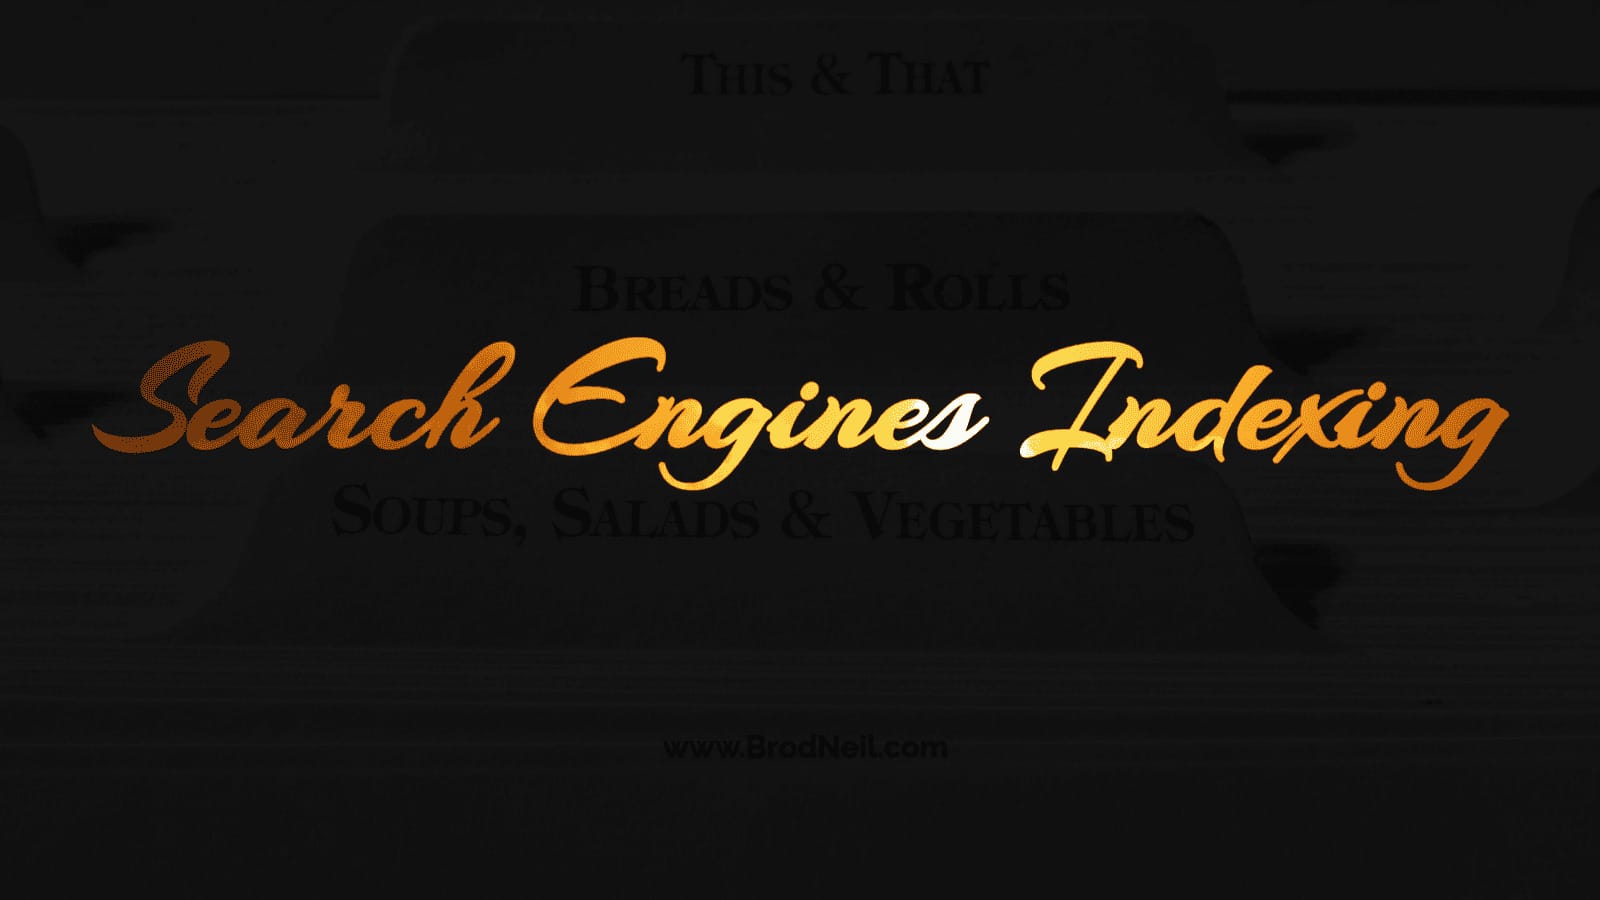 Search Engines Indexing